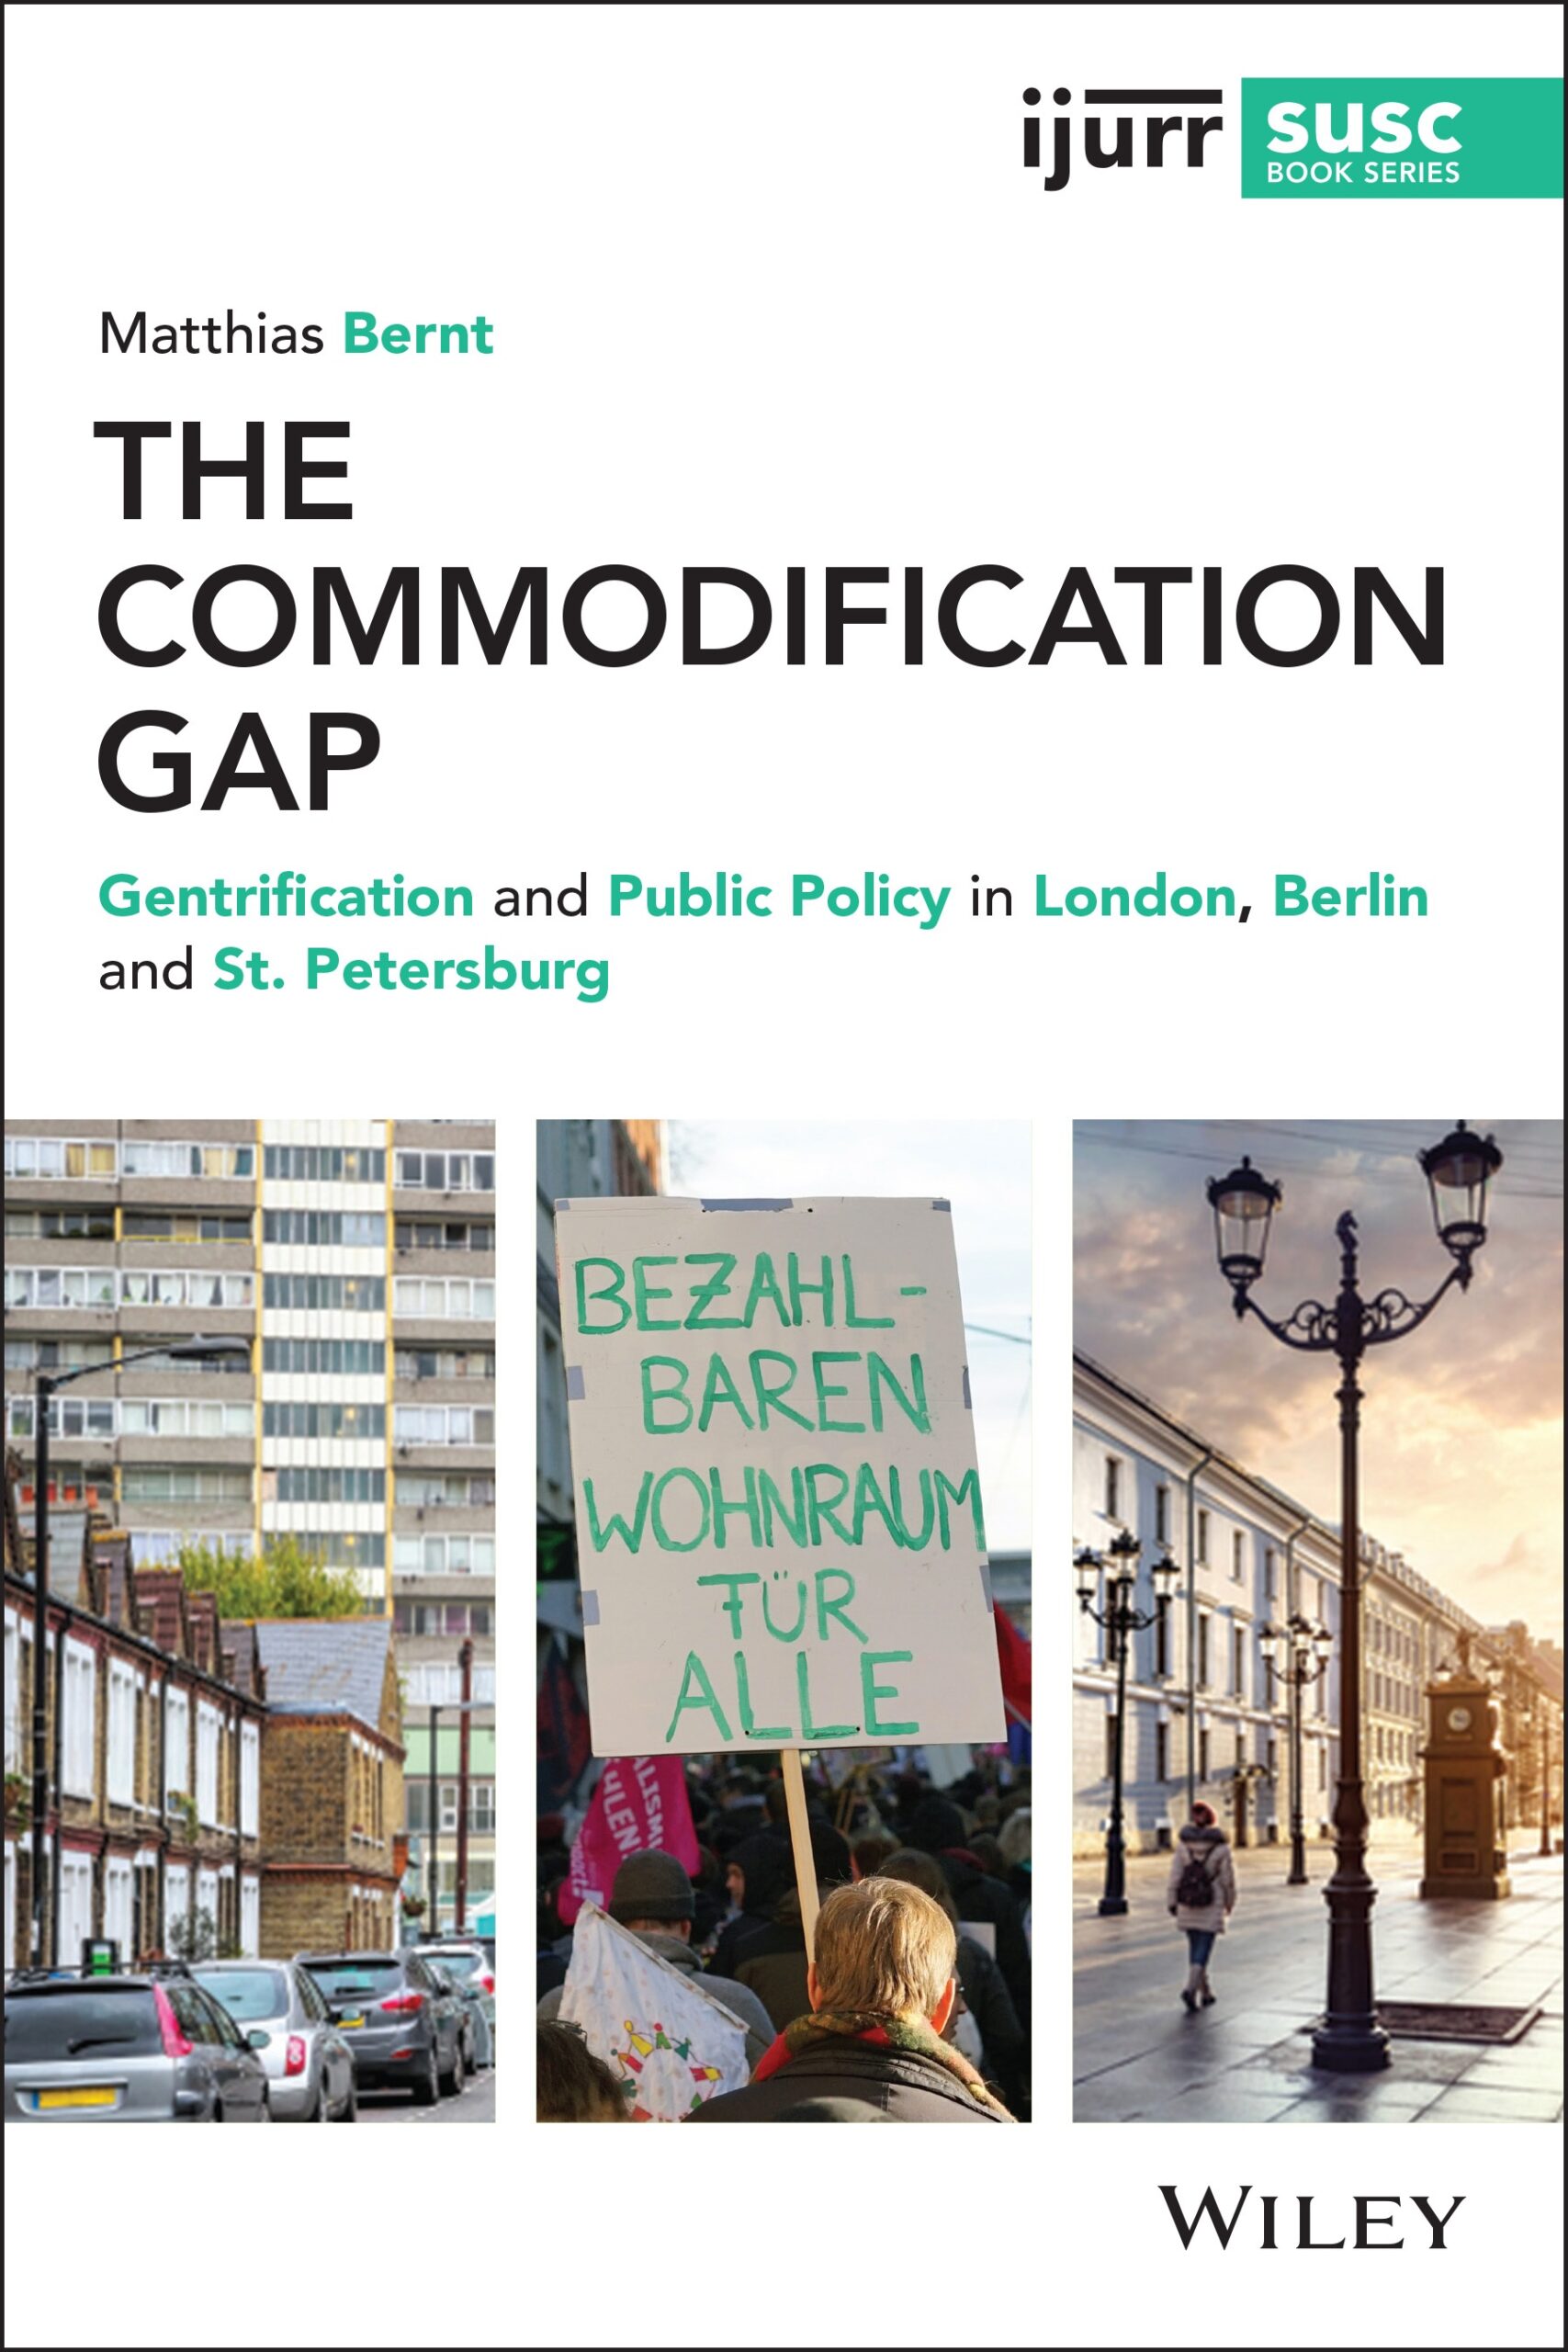 Abb. 1 The commodification gap. Gentrification and public policy in London, Berlin and St. Petersburg (Quelle: Wiley)